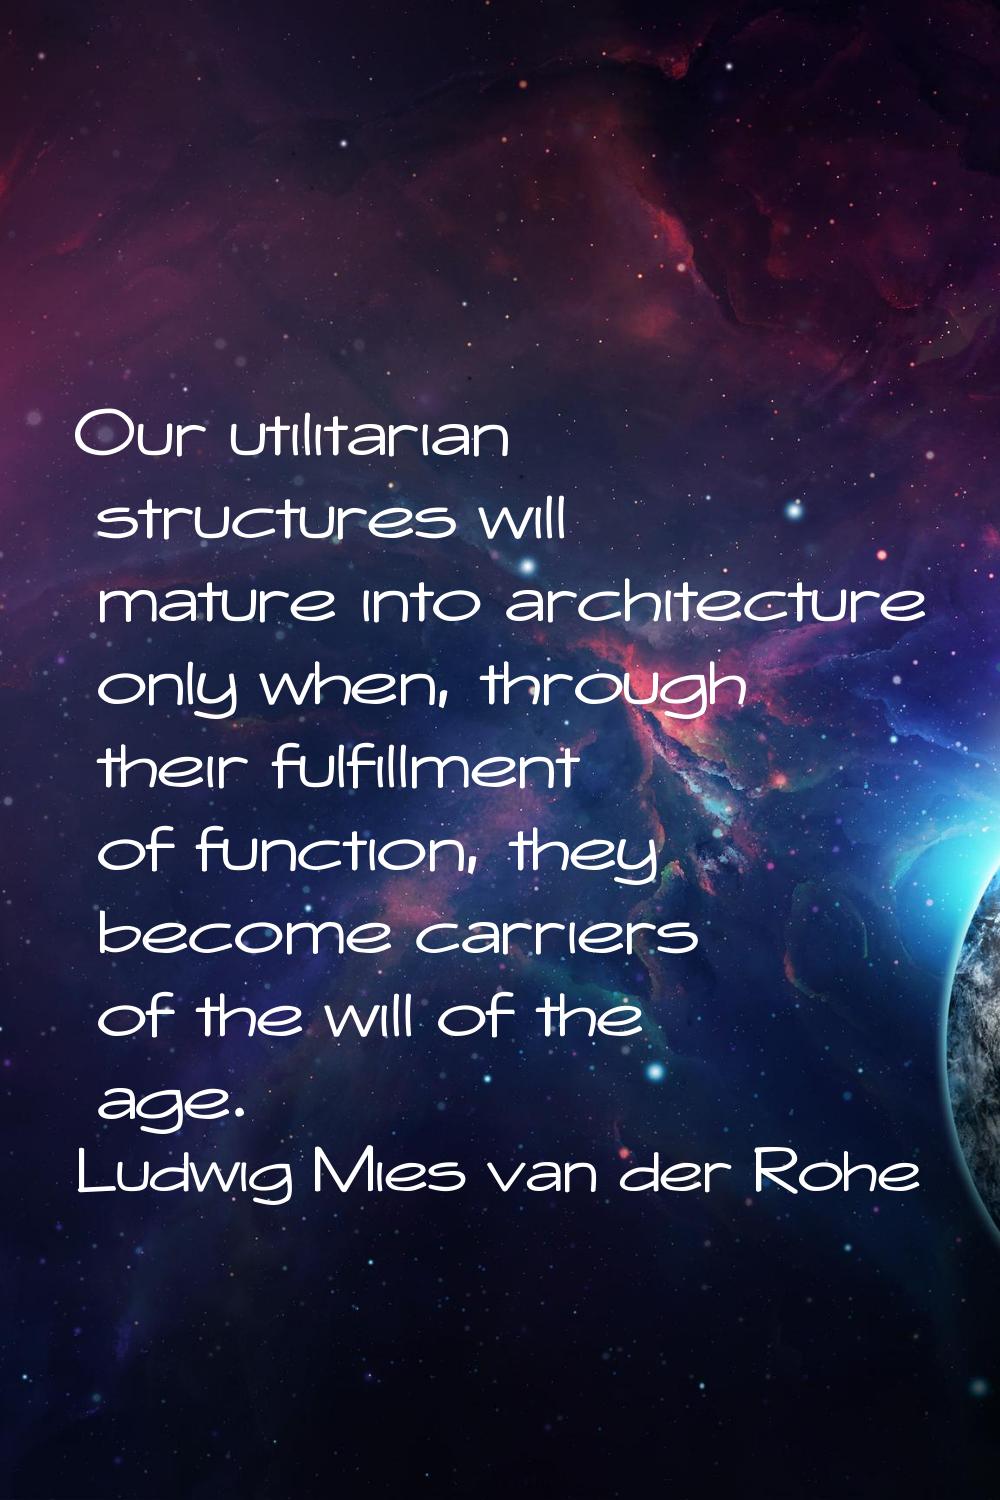 Our utilitarian structures will mature into architecture only when, through their fulfillment of fu